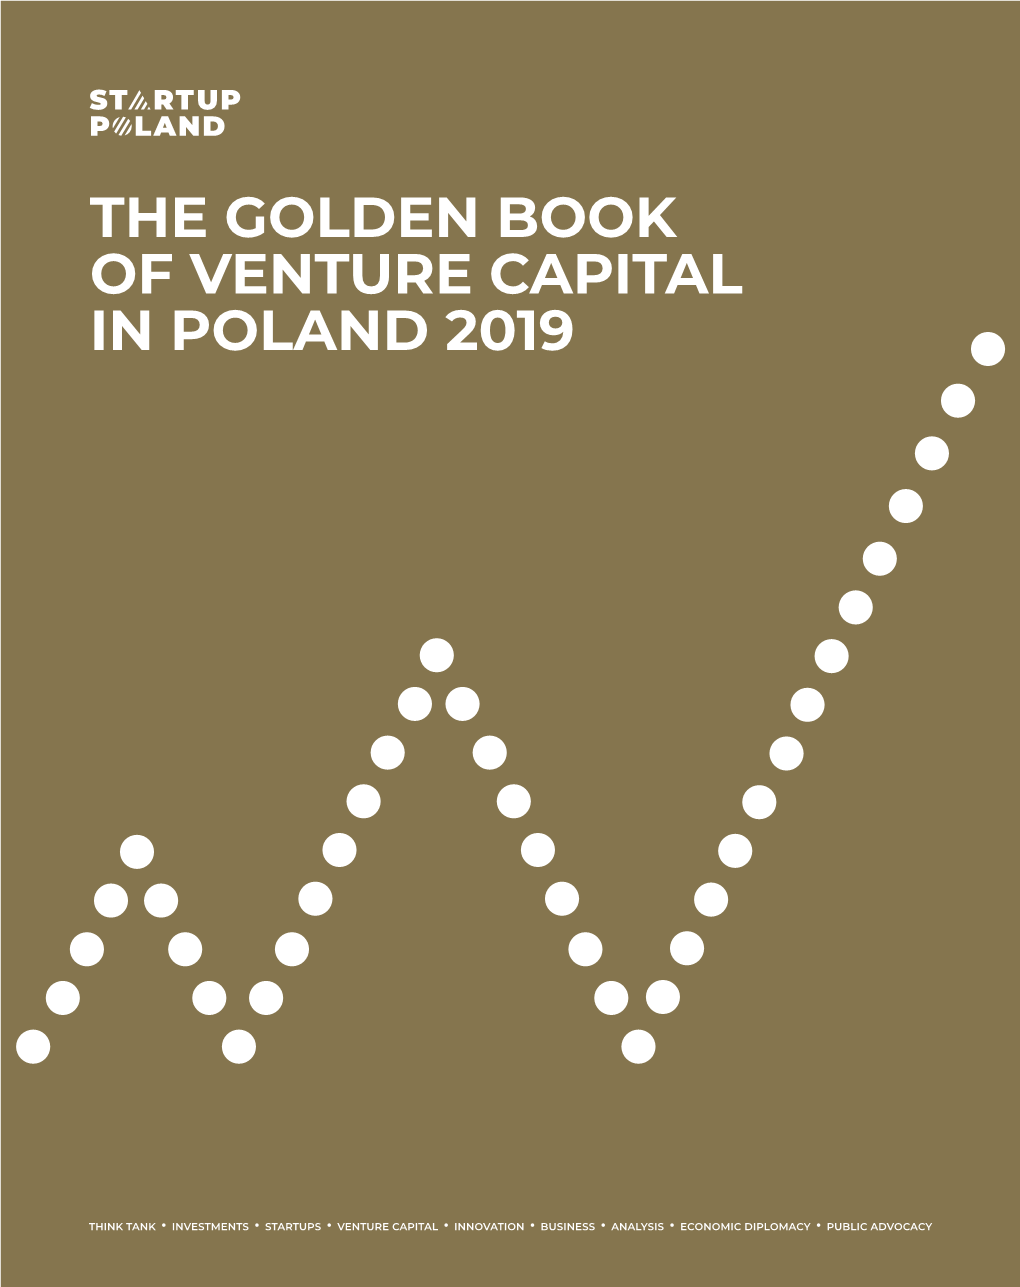 The Golden Book of Venture Capital in Poland 2019